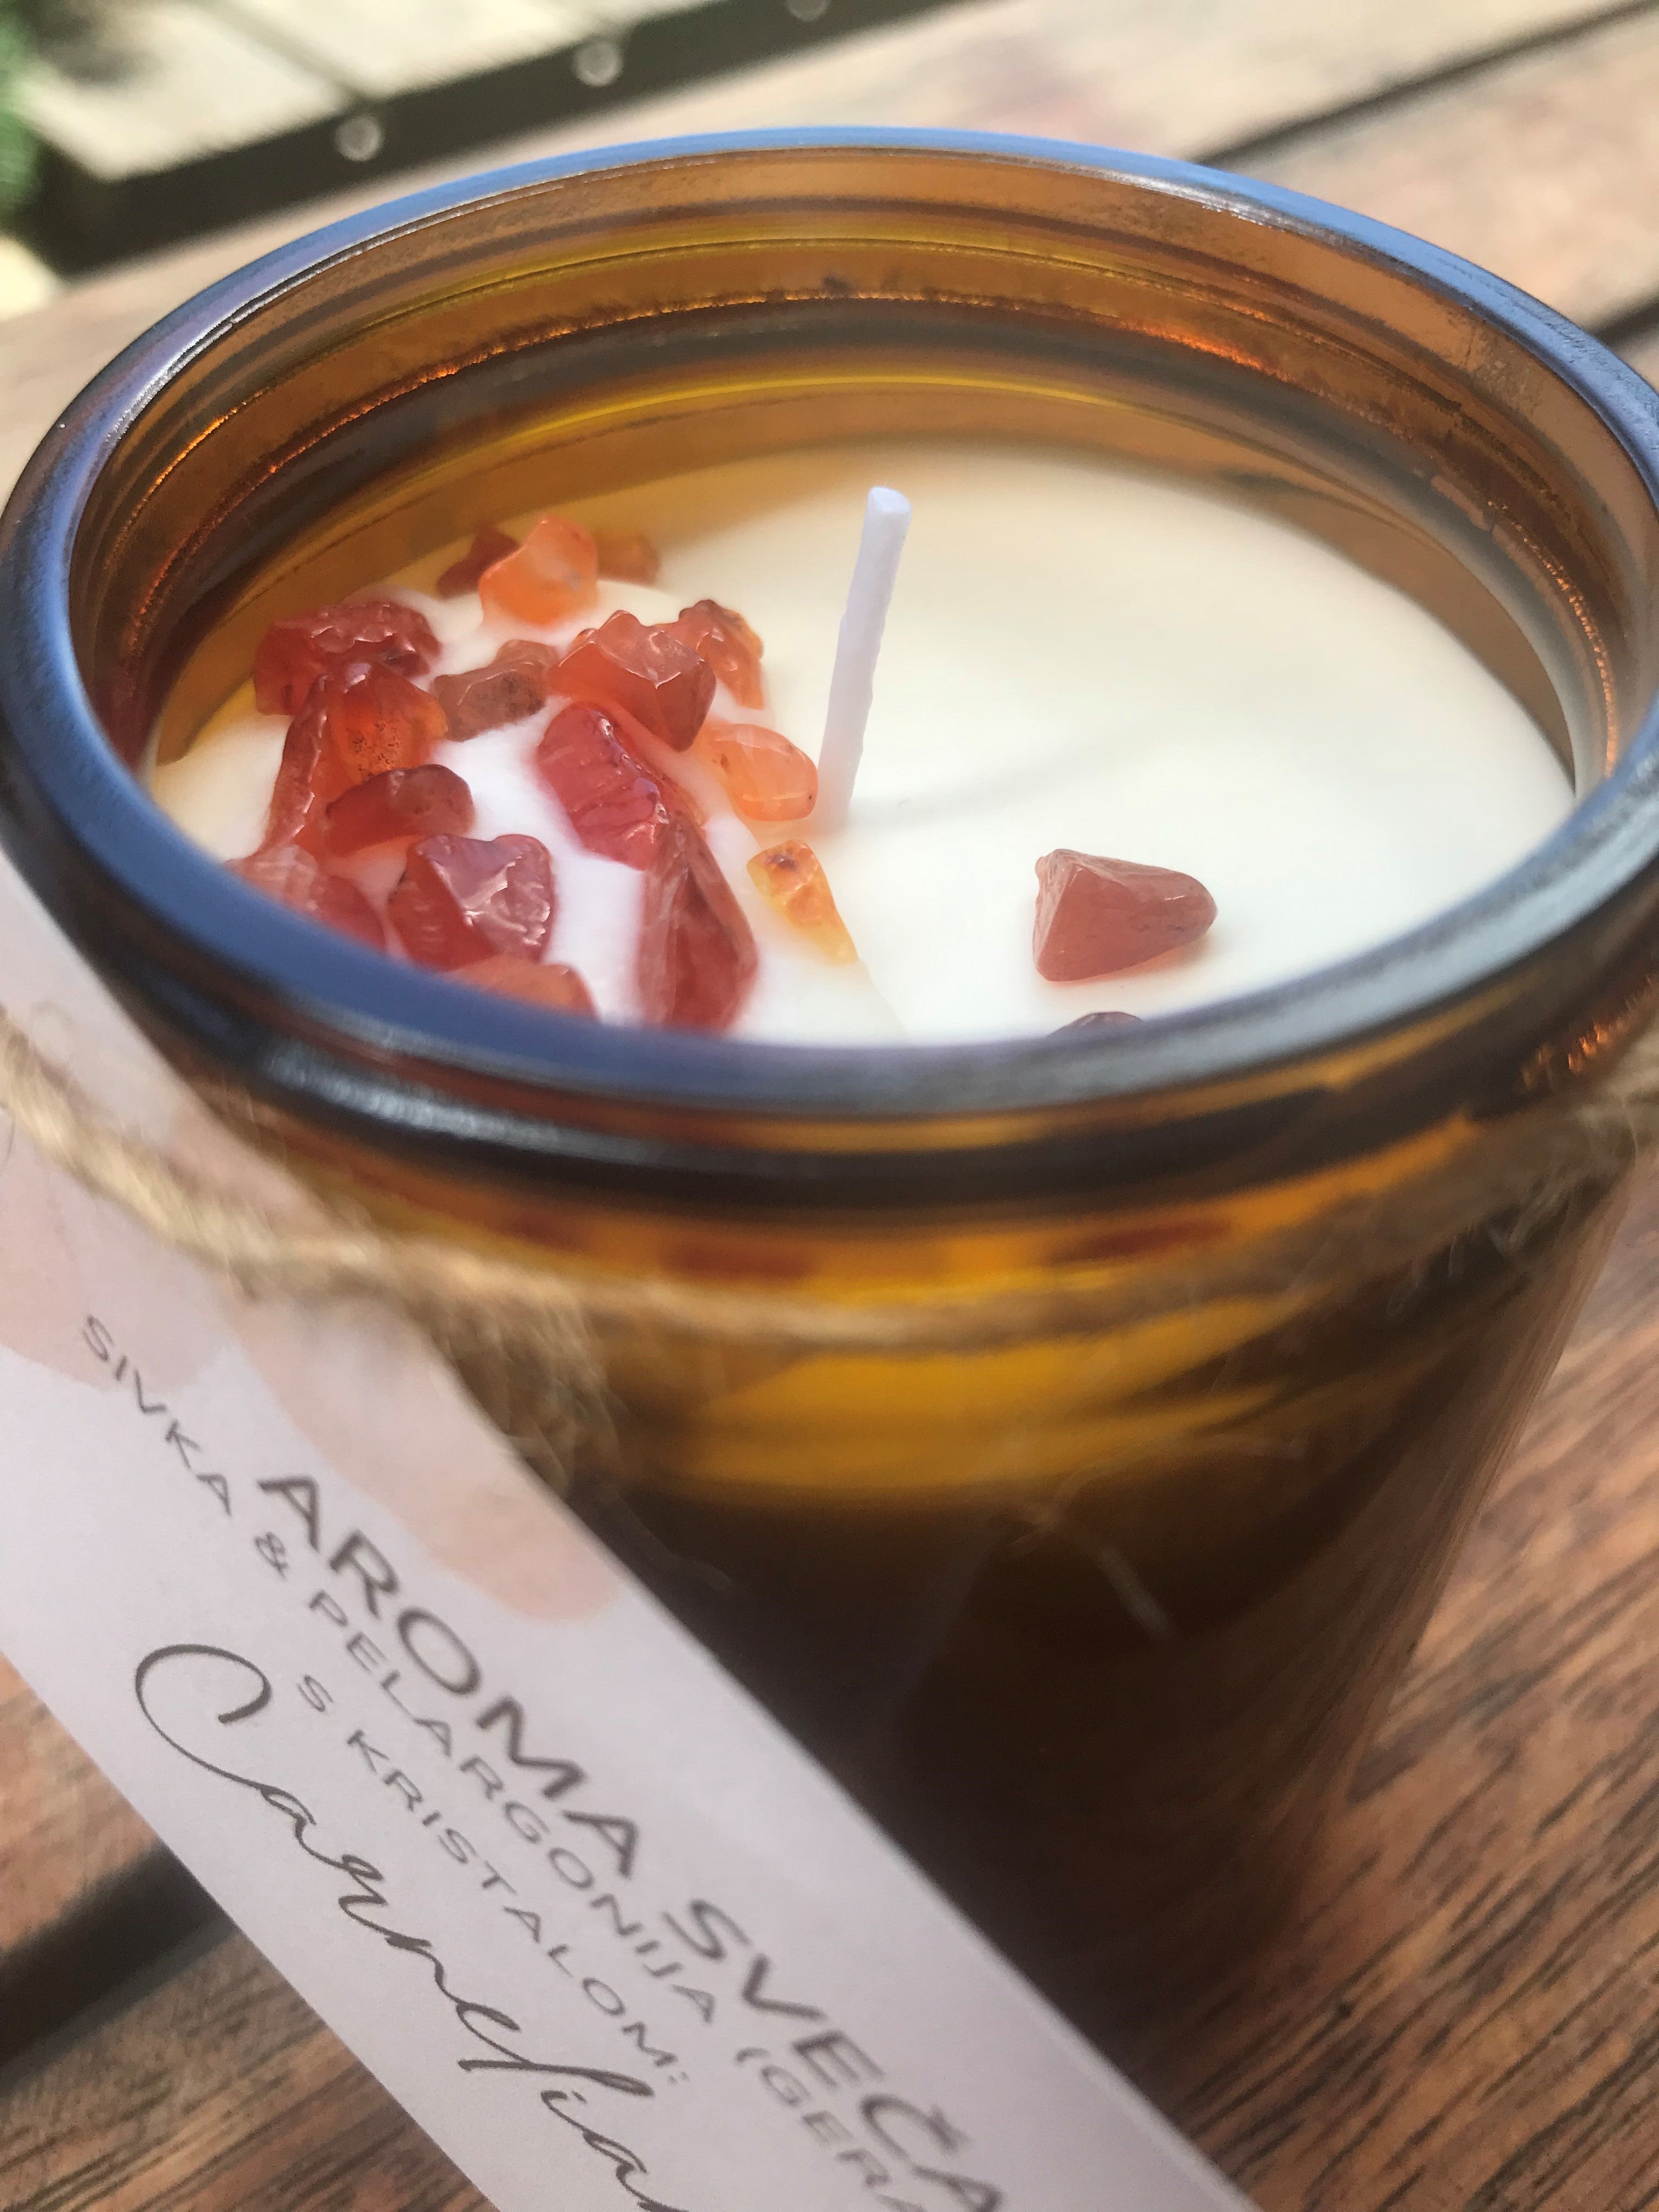 Aroma Candle with Crystals (Carnelian)